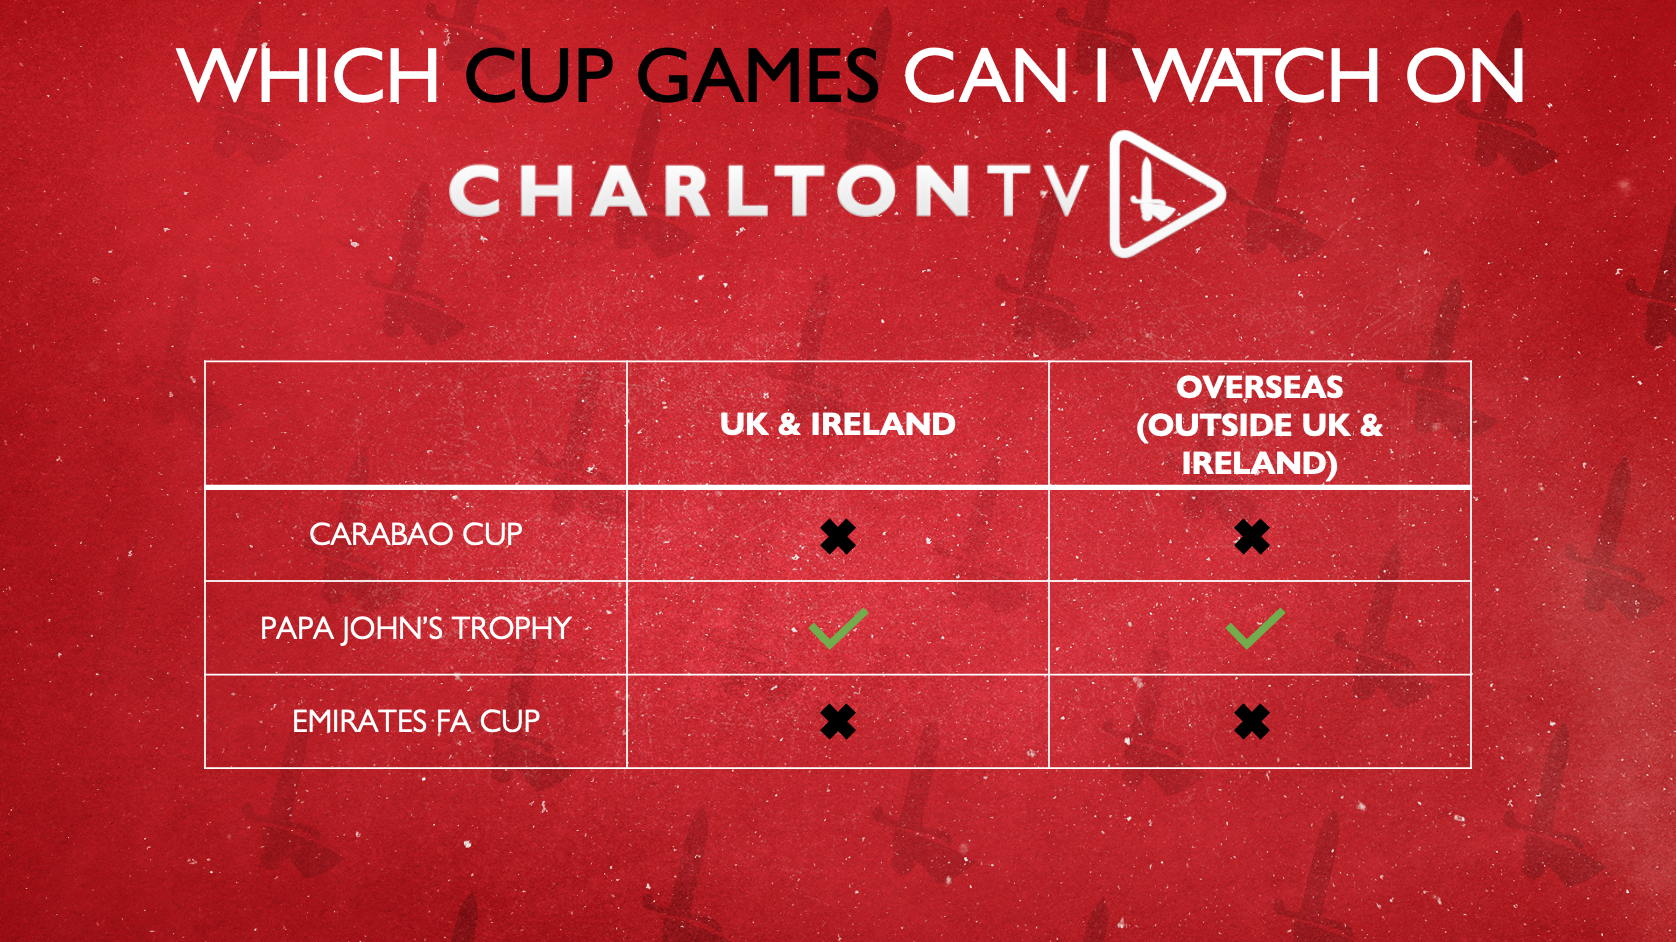 CharltonTV cup games you can watch